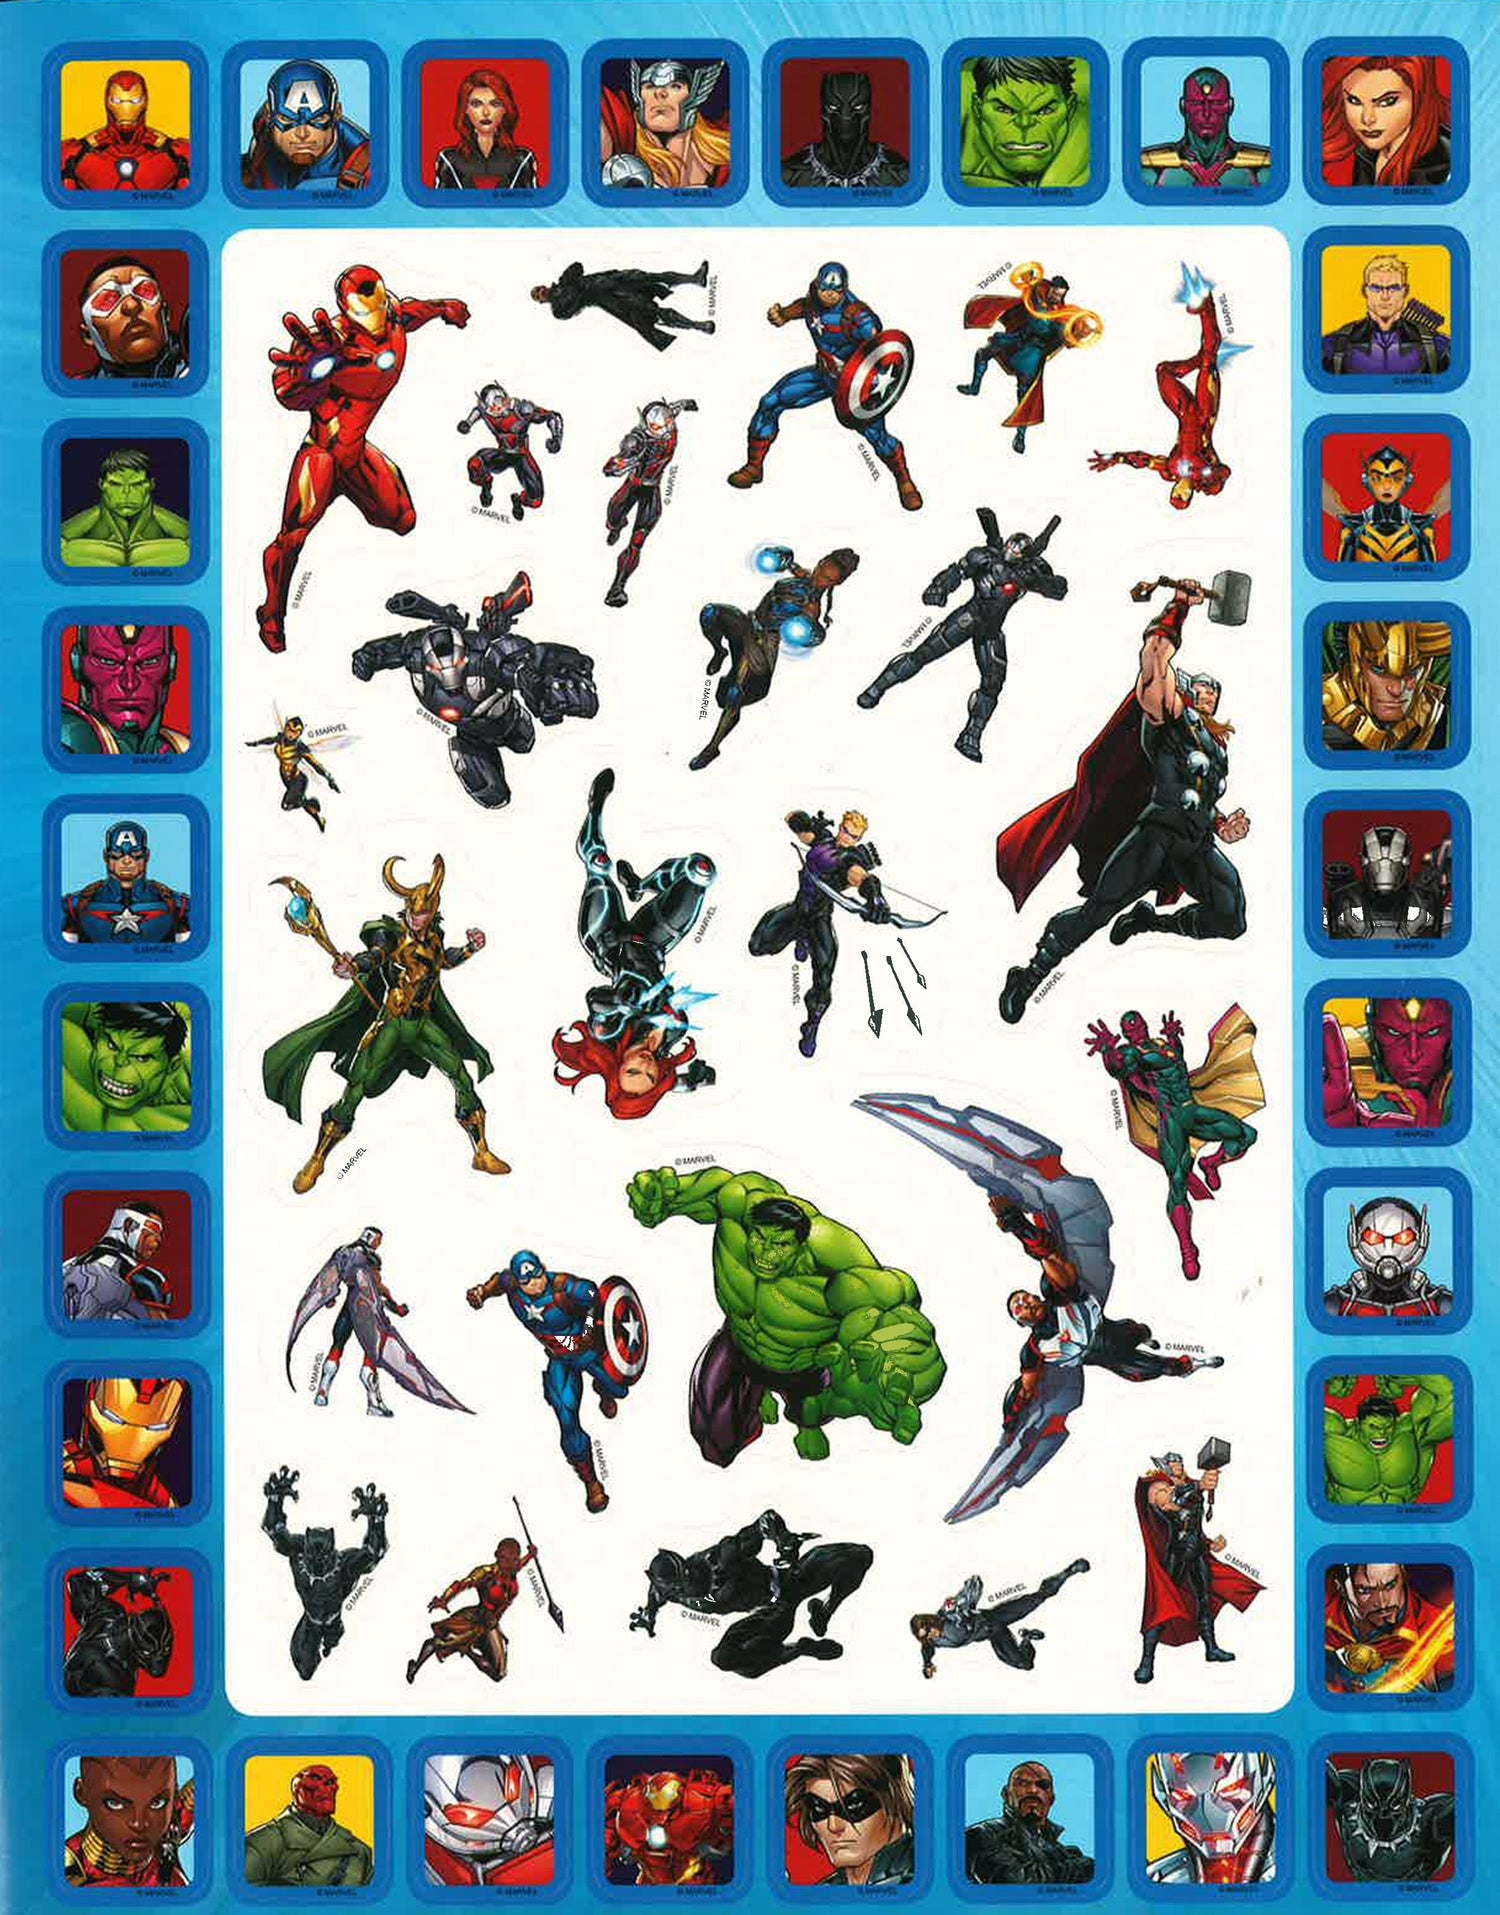 1001 Stickers Marvel: Marvel Avengers (F): 1001 Stickers – BookXcess